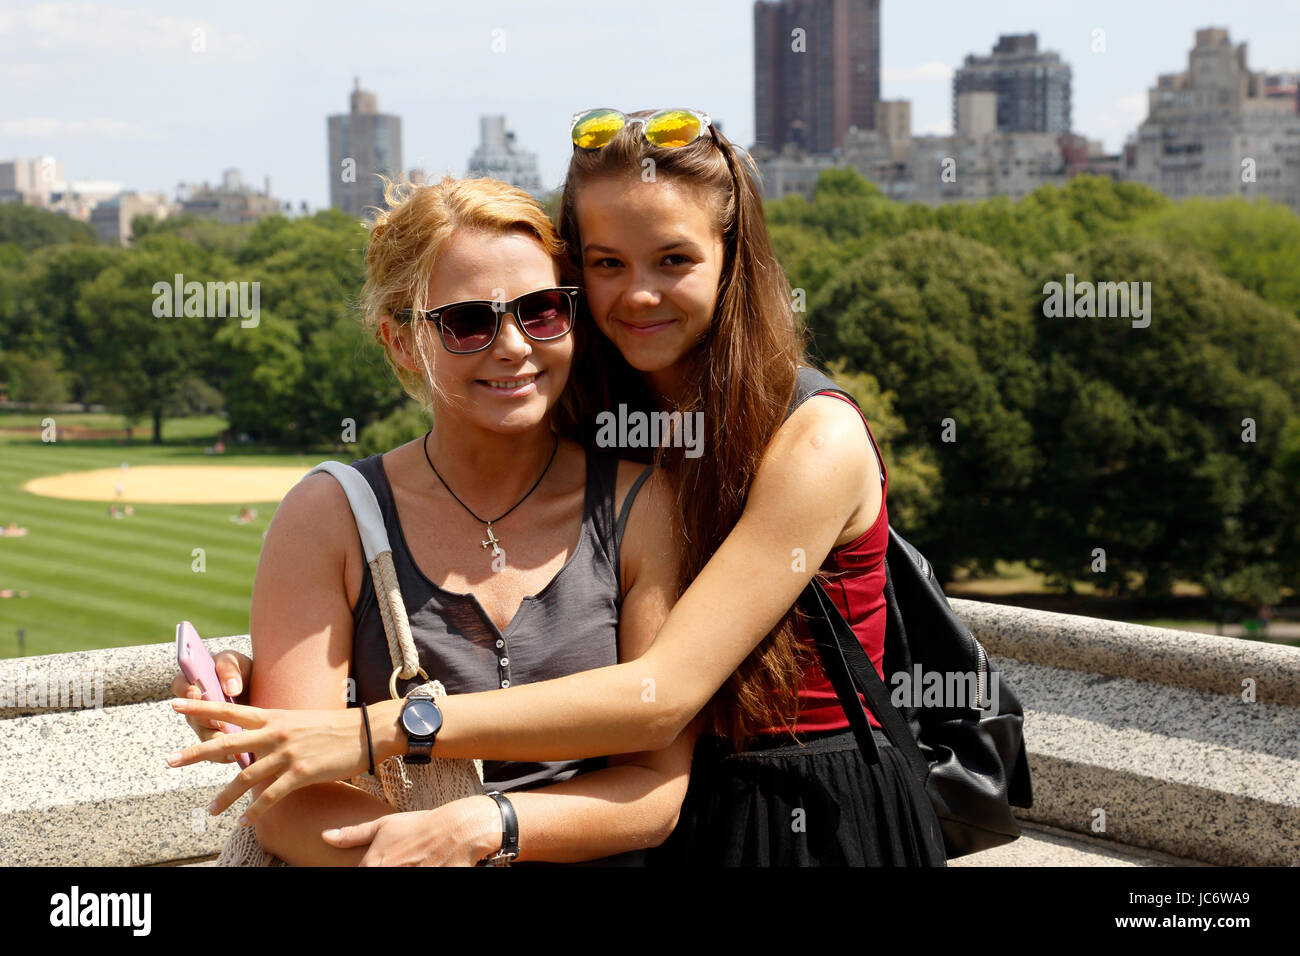 Tourists. Mather and Daughter. Central Park. Manhattan. New York City. US 17, 18, 19, 20, 21, 25, 40, 44, 45, 49, 50, 54, years, years old Stock Photo